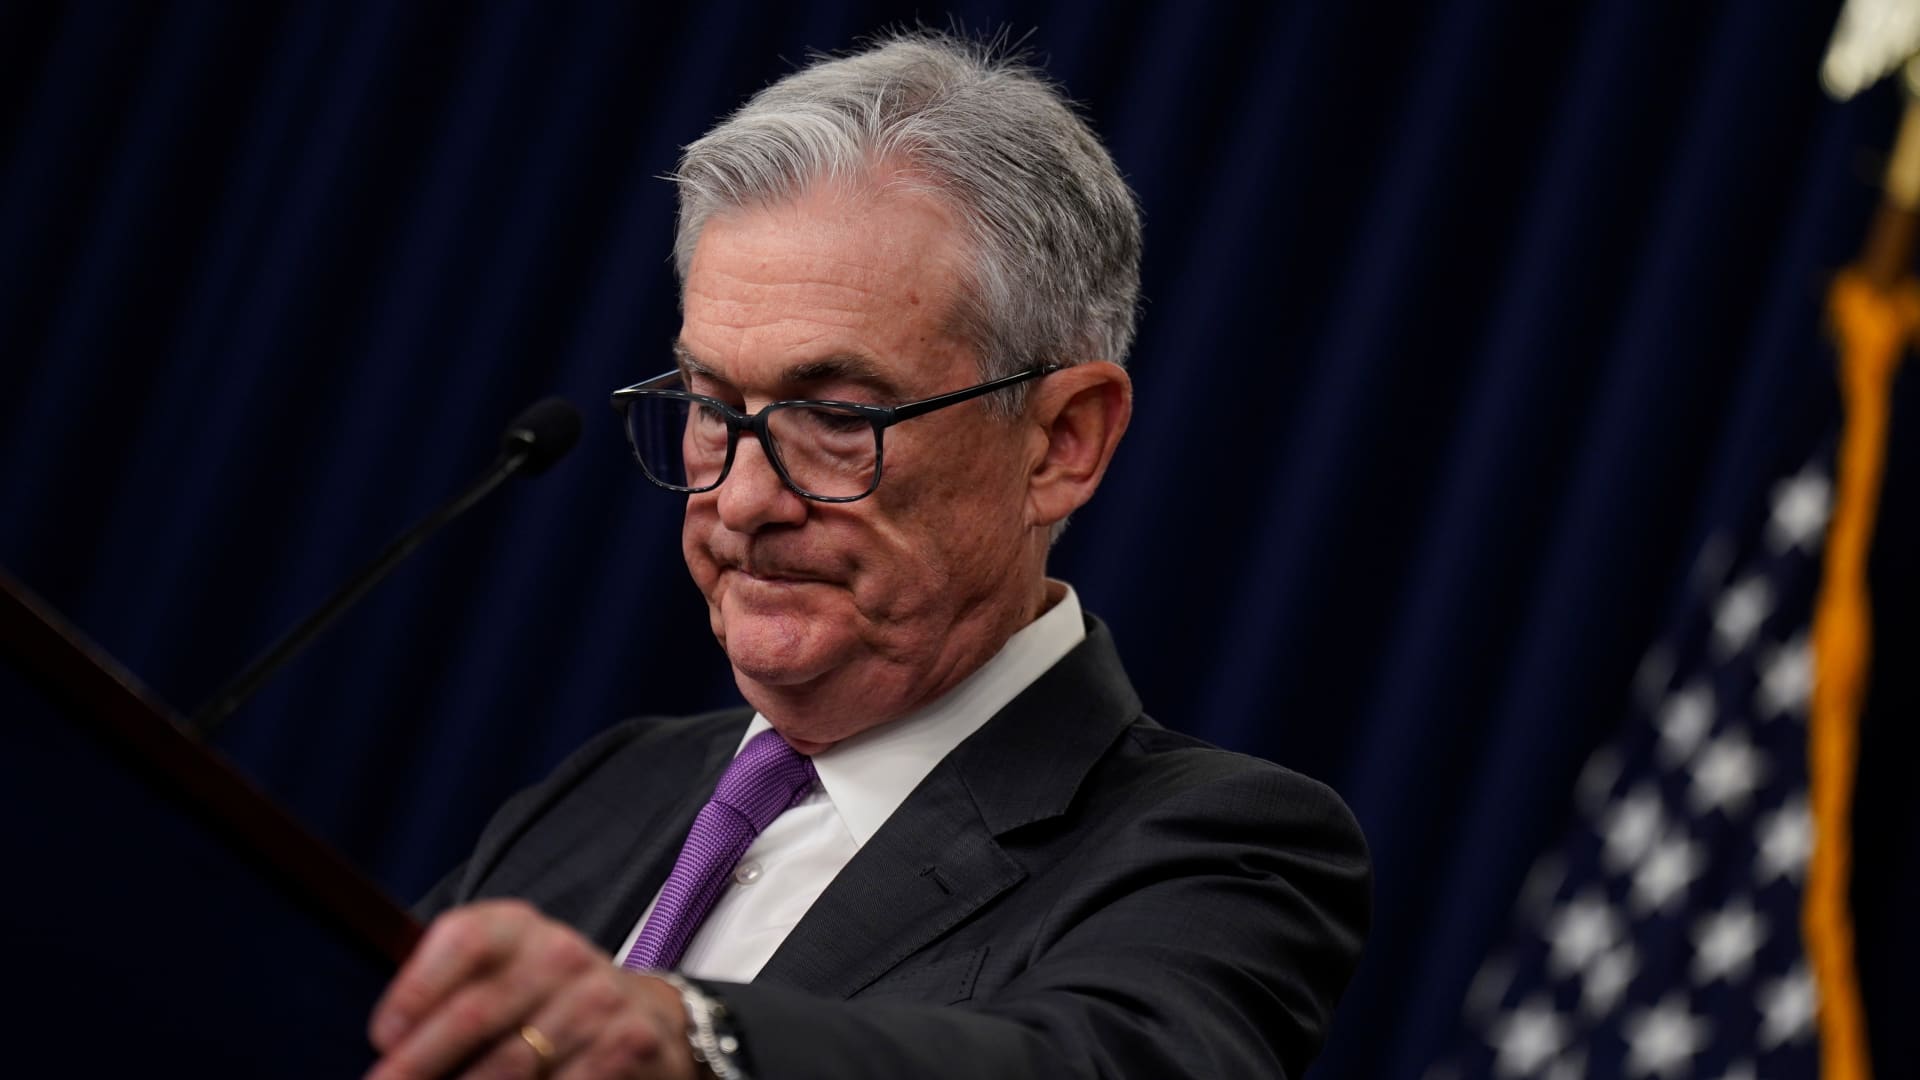 The Fed may be about to crash the plane, but the focus should be on profits